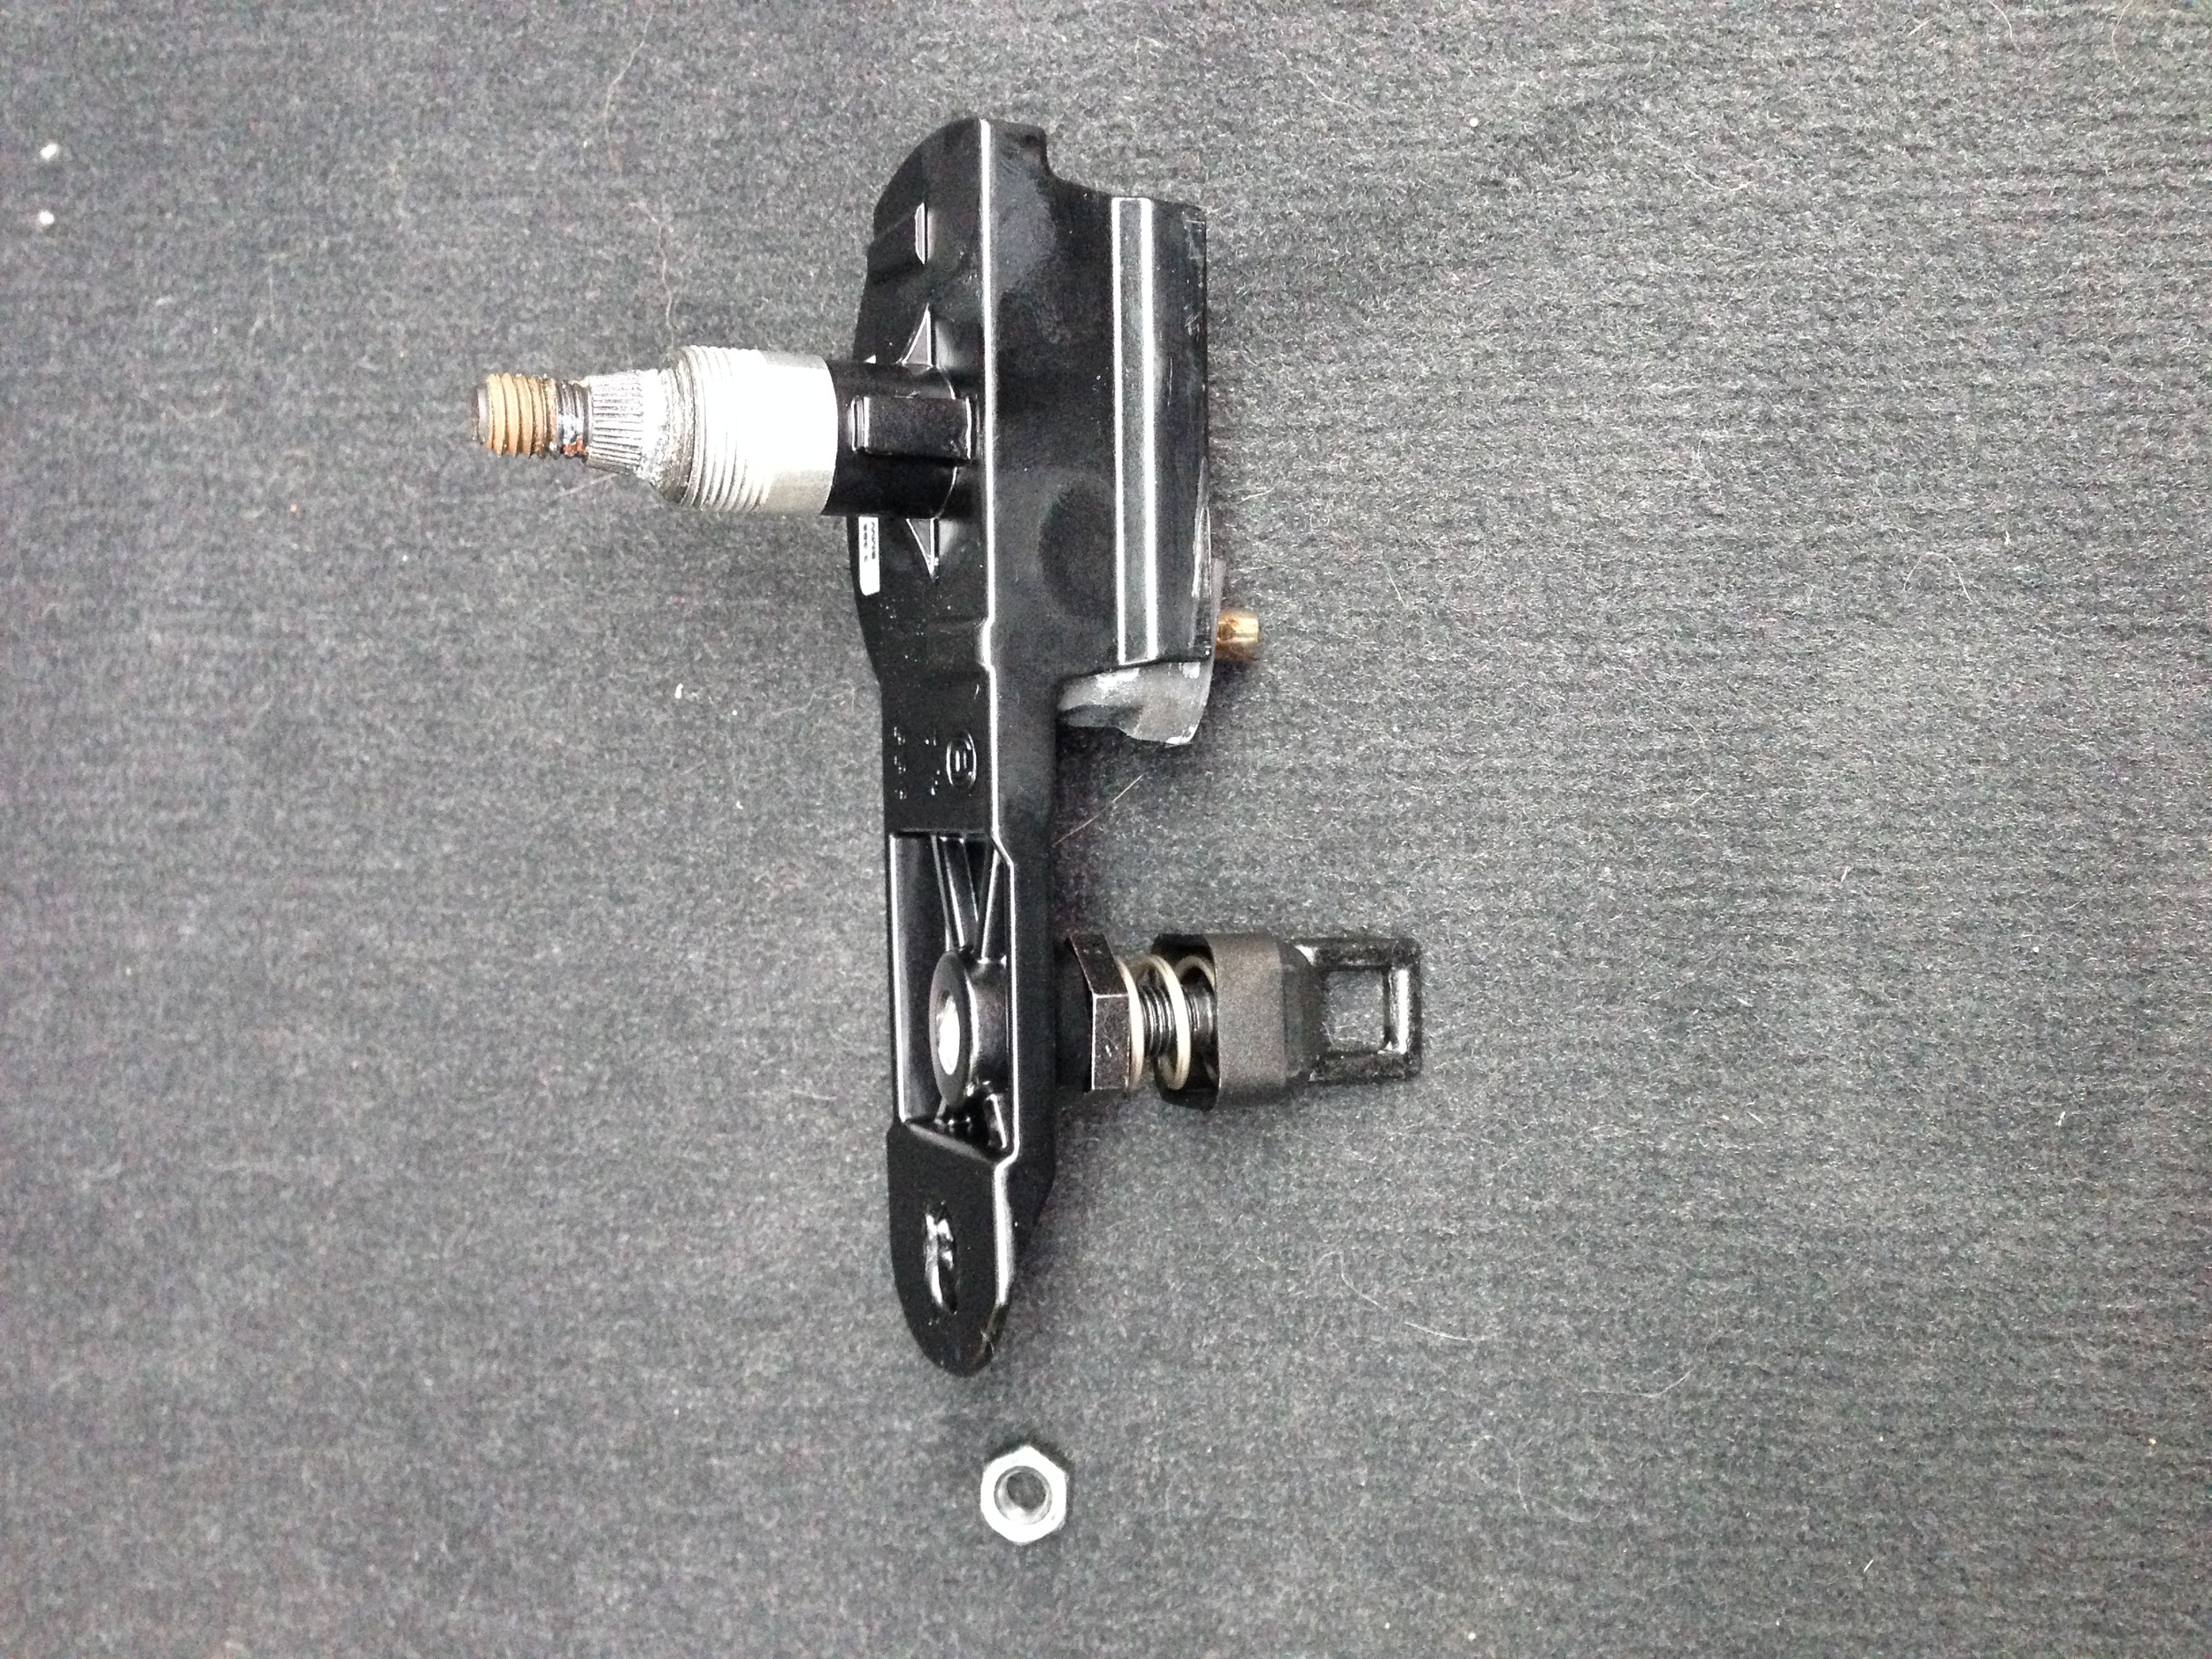 Wiper spindle assembly